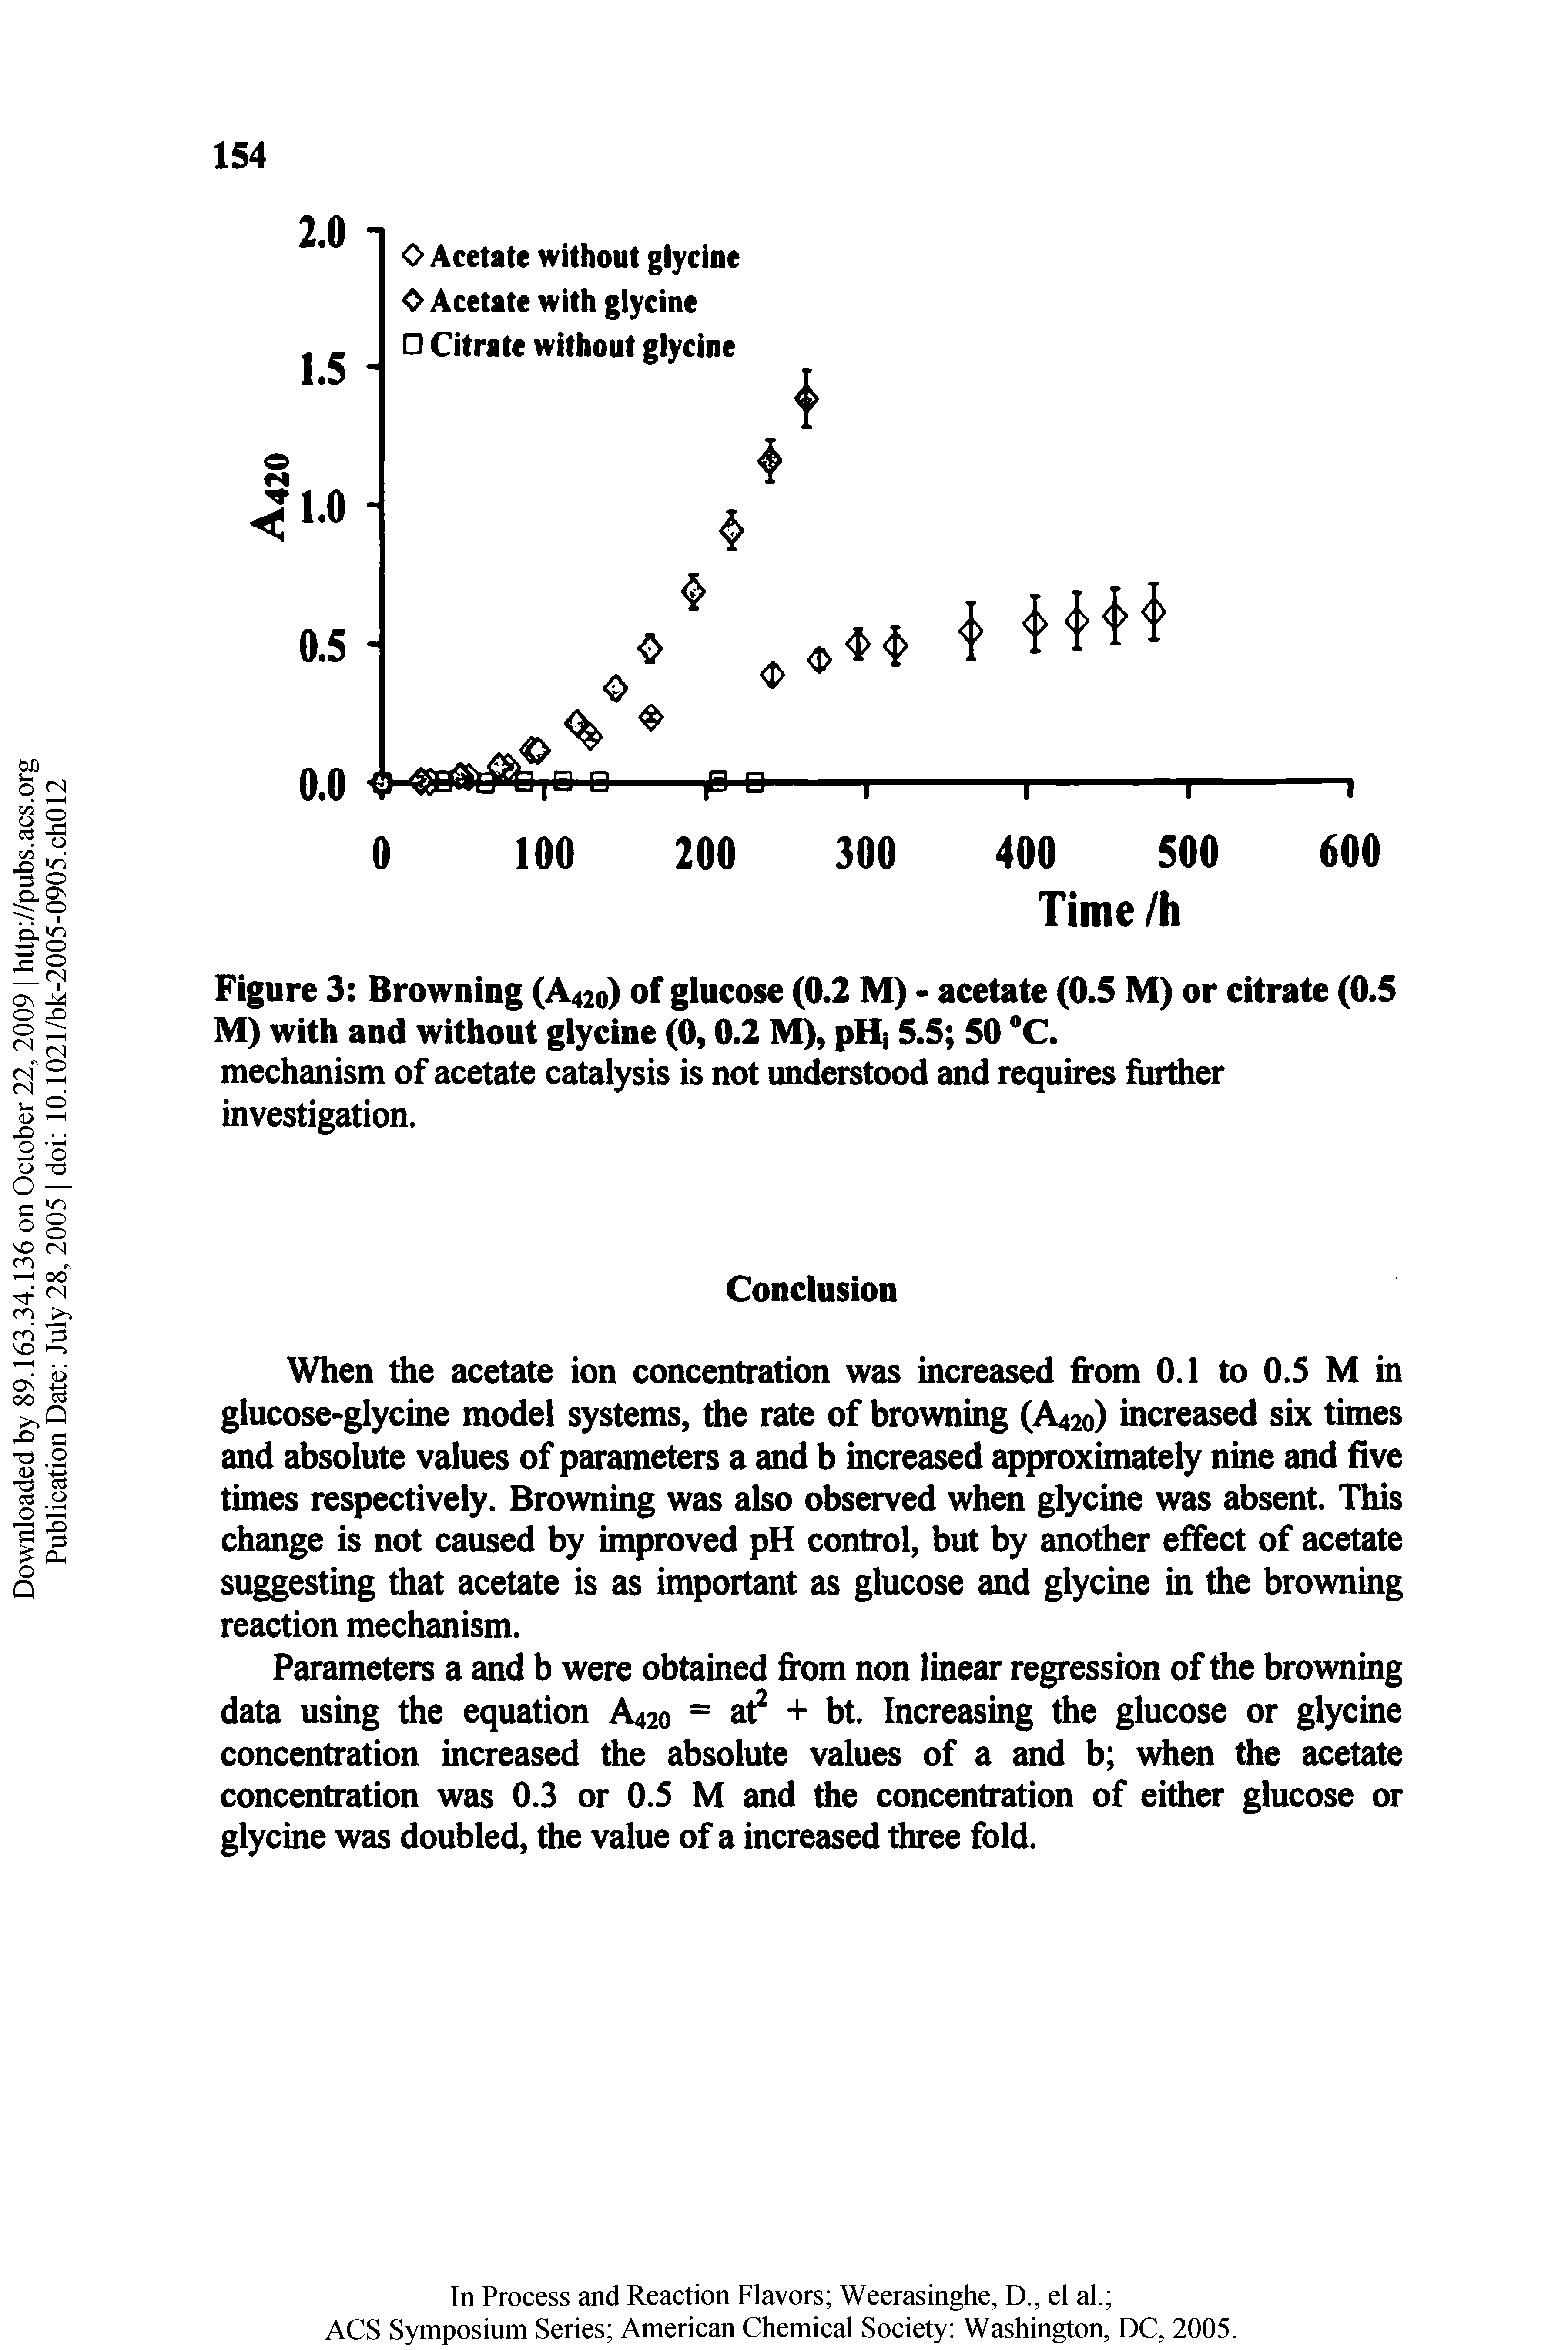 Figure 3 Browning (A420) of glucose (0.2 M) - acetate (0.5 M) or citrate (0.5 M) with and without glycine (0,0.2 M), pHj 5.5 50 C. mechanism of acetate catalysis is not understood and requires further investigation.